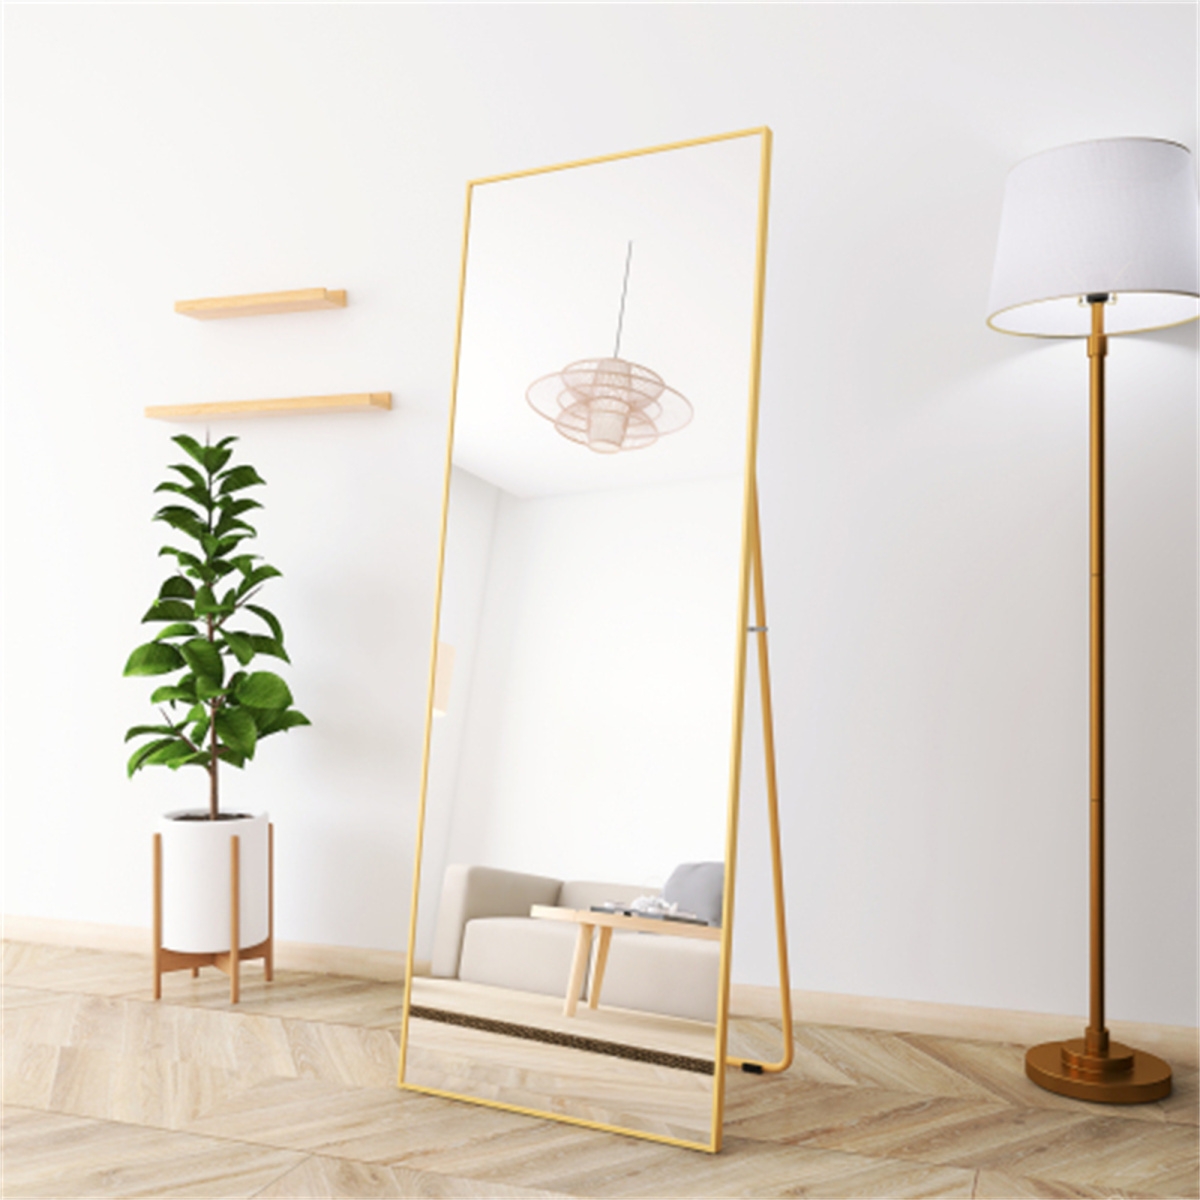 Wall-Mounted Alloy Frame Full Length Mirror - Gold